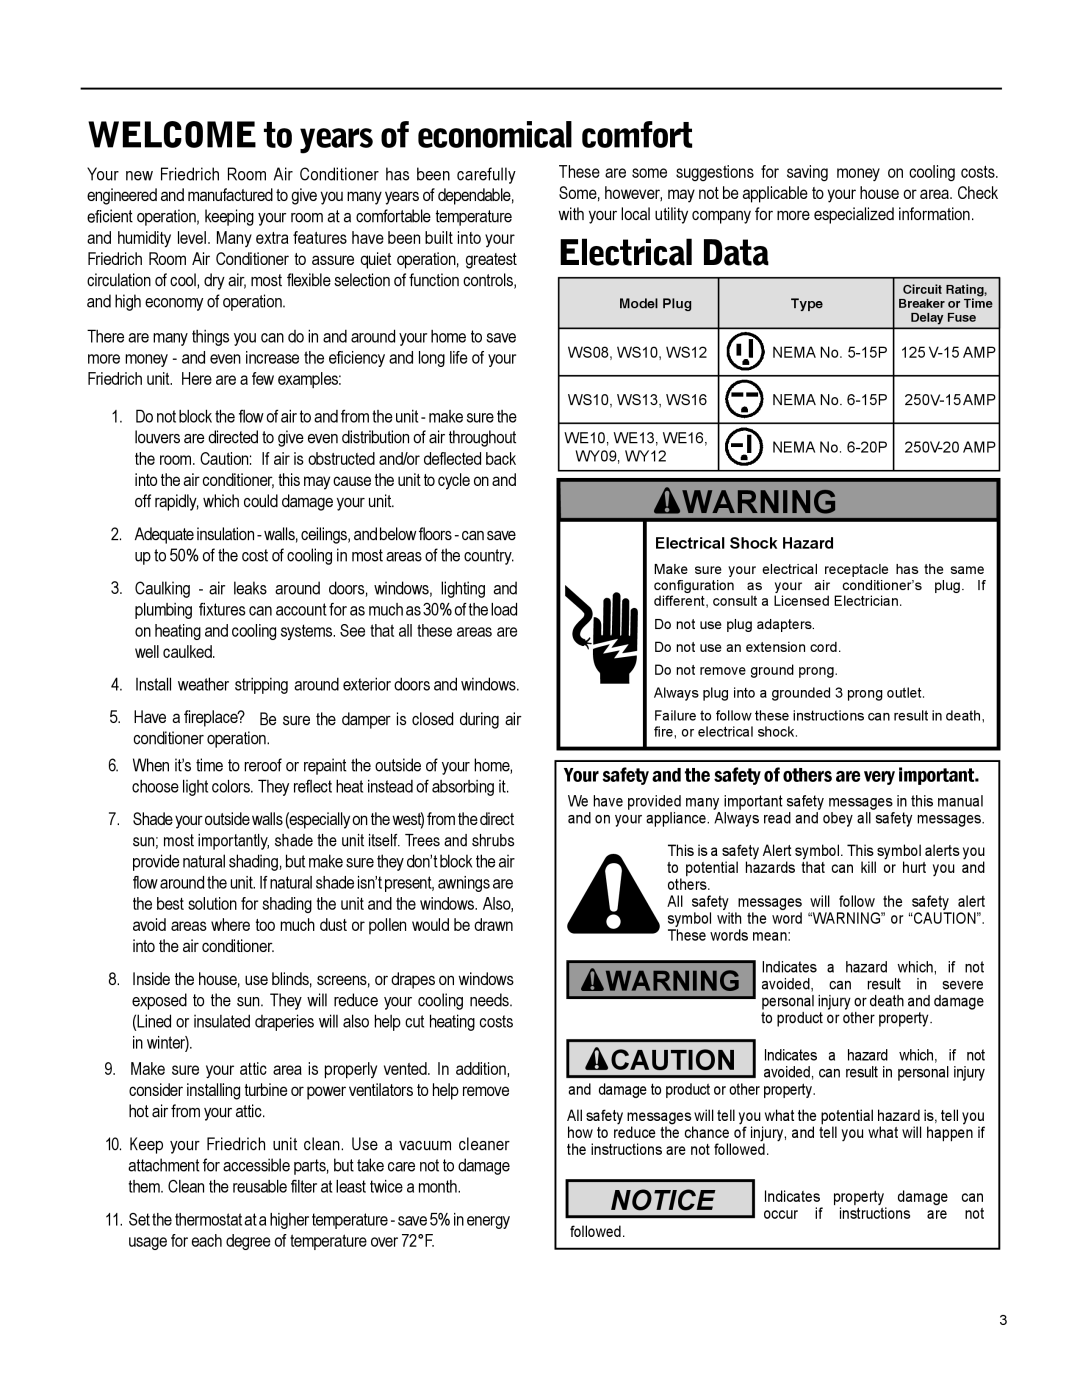 Friedrich WY12, WY09, WS12 operation manual WELCOME to years of economical comfort, Electrical Data 